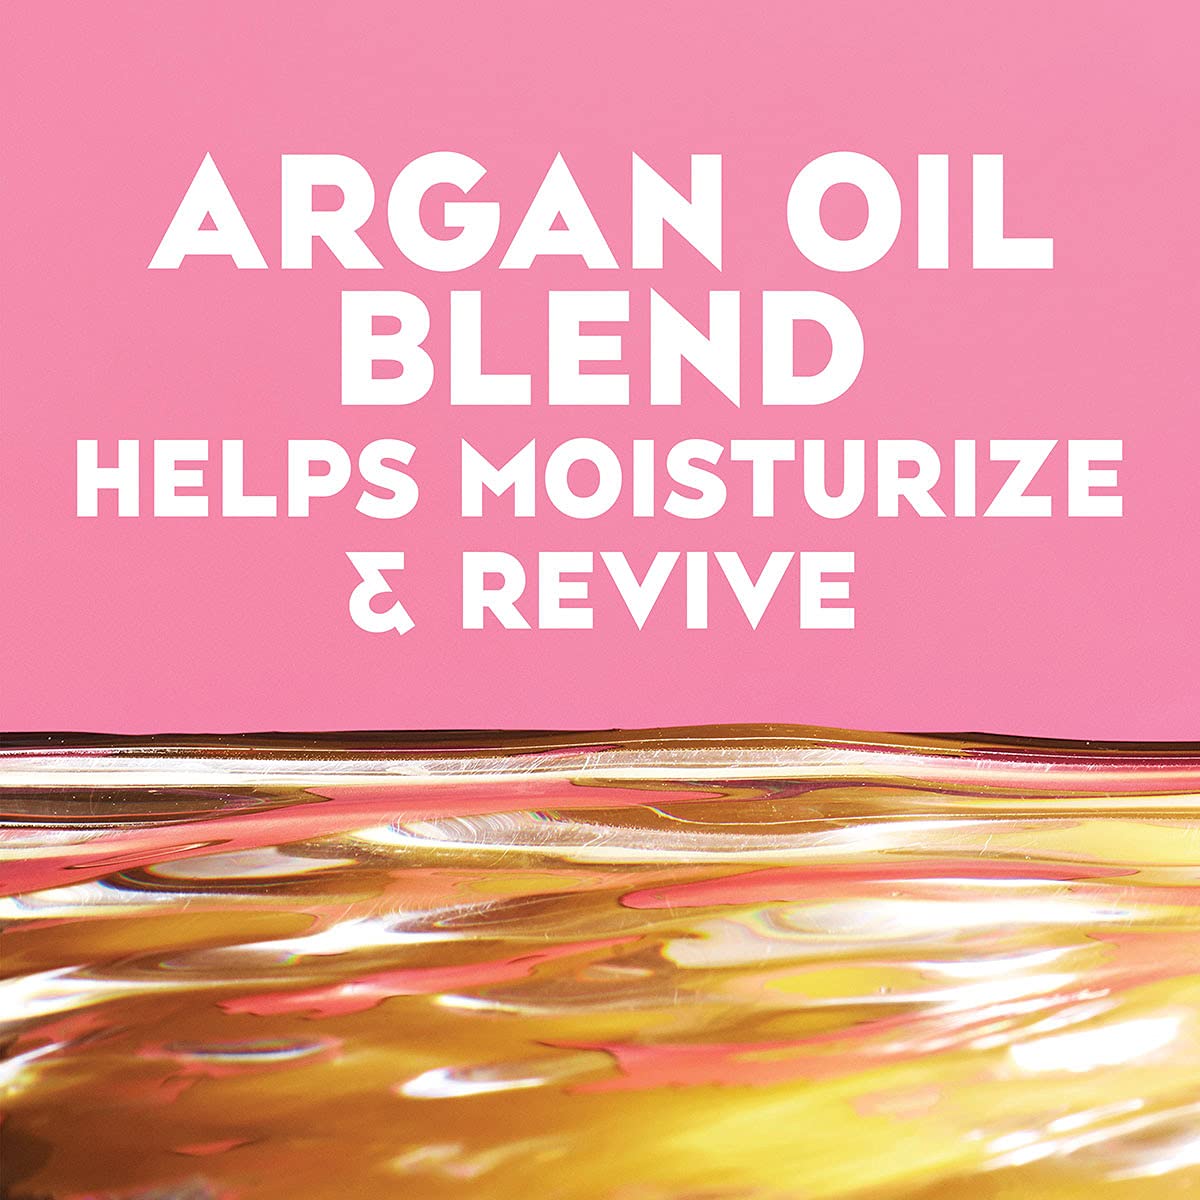 OGX Extra Strength Renewing + Argan Oil of Morocco Penetrating Hair Oil Treatment Find Your New Look Today!